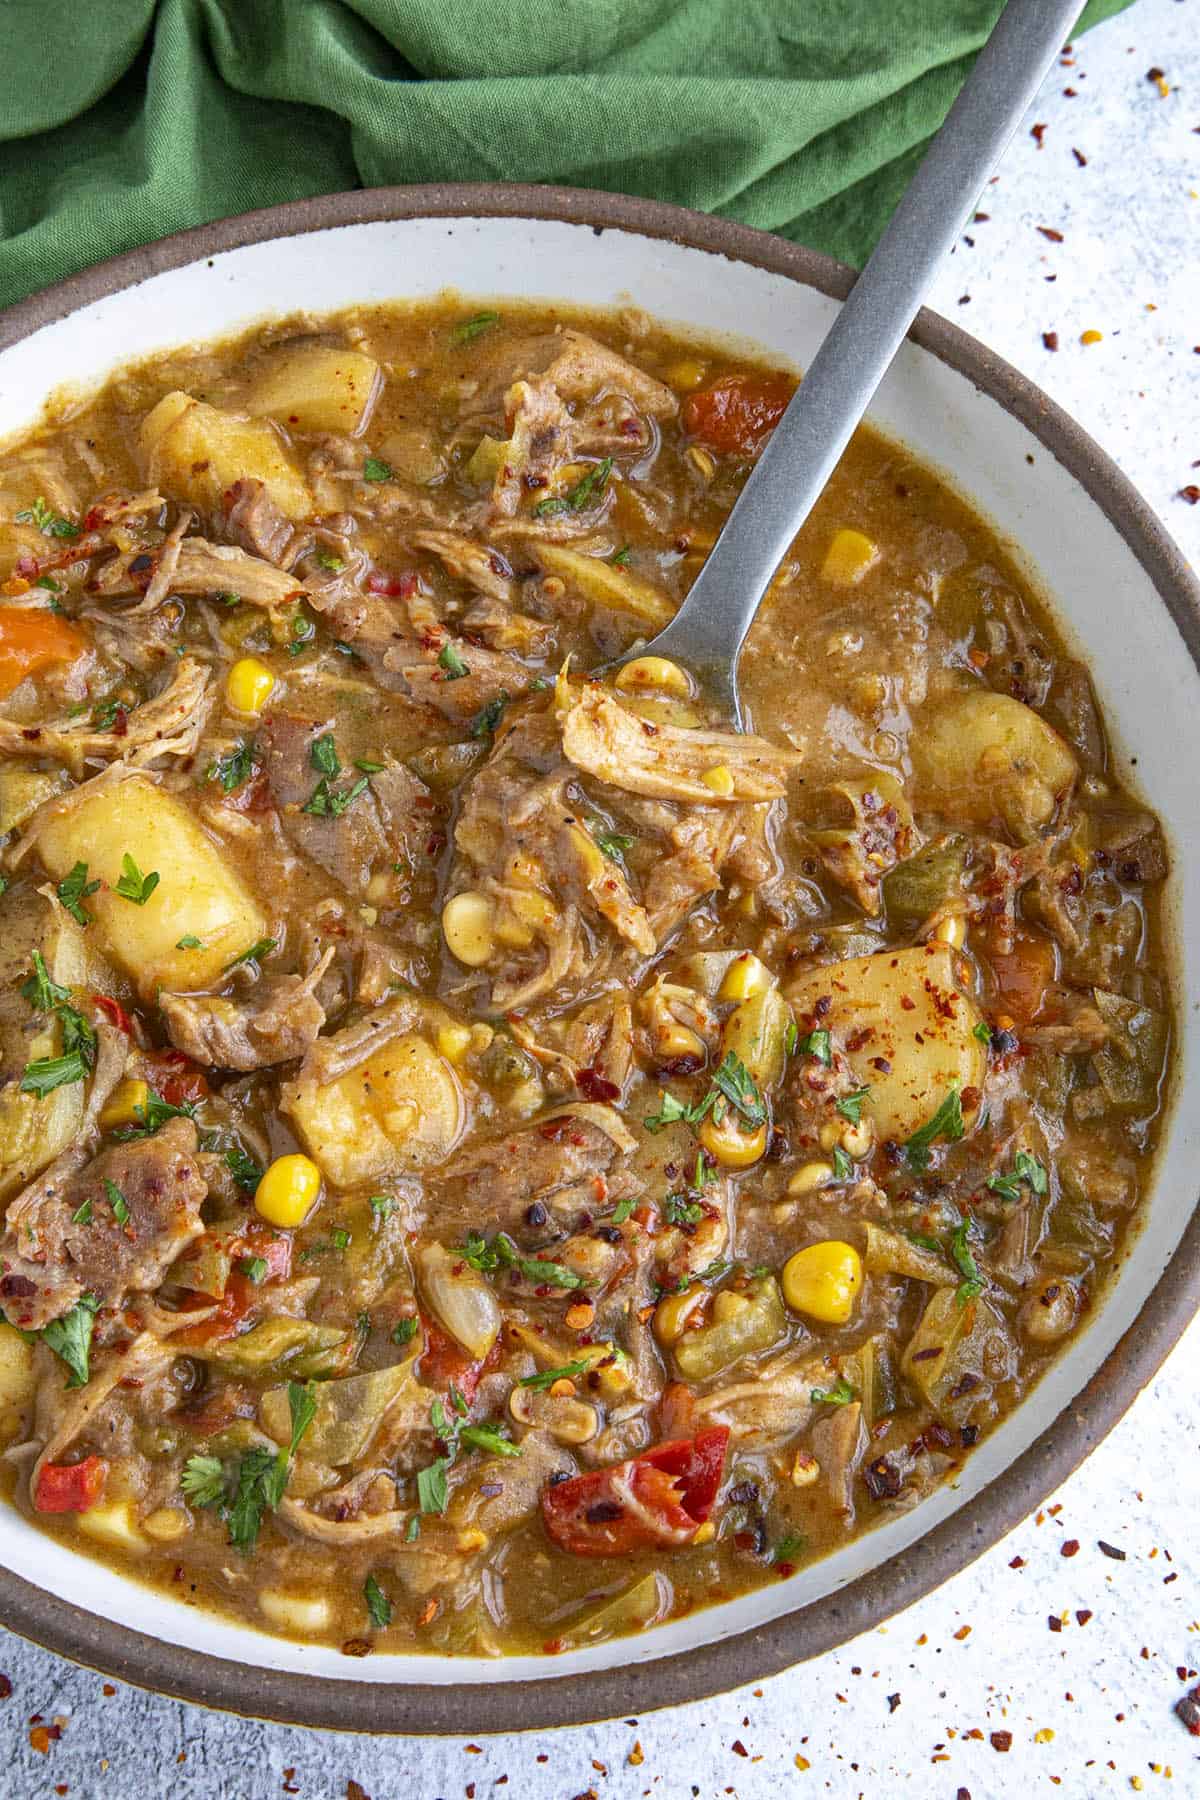 Hearty Turkey Stew in a bowl, ready to serve